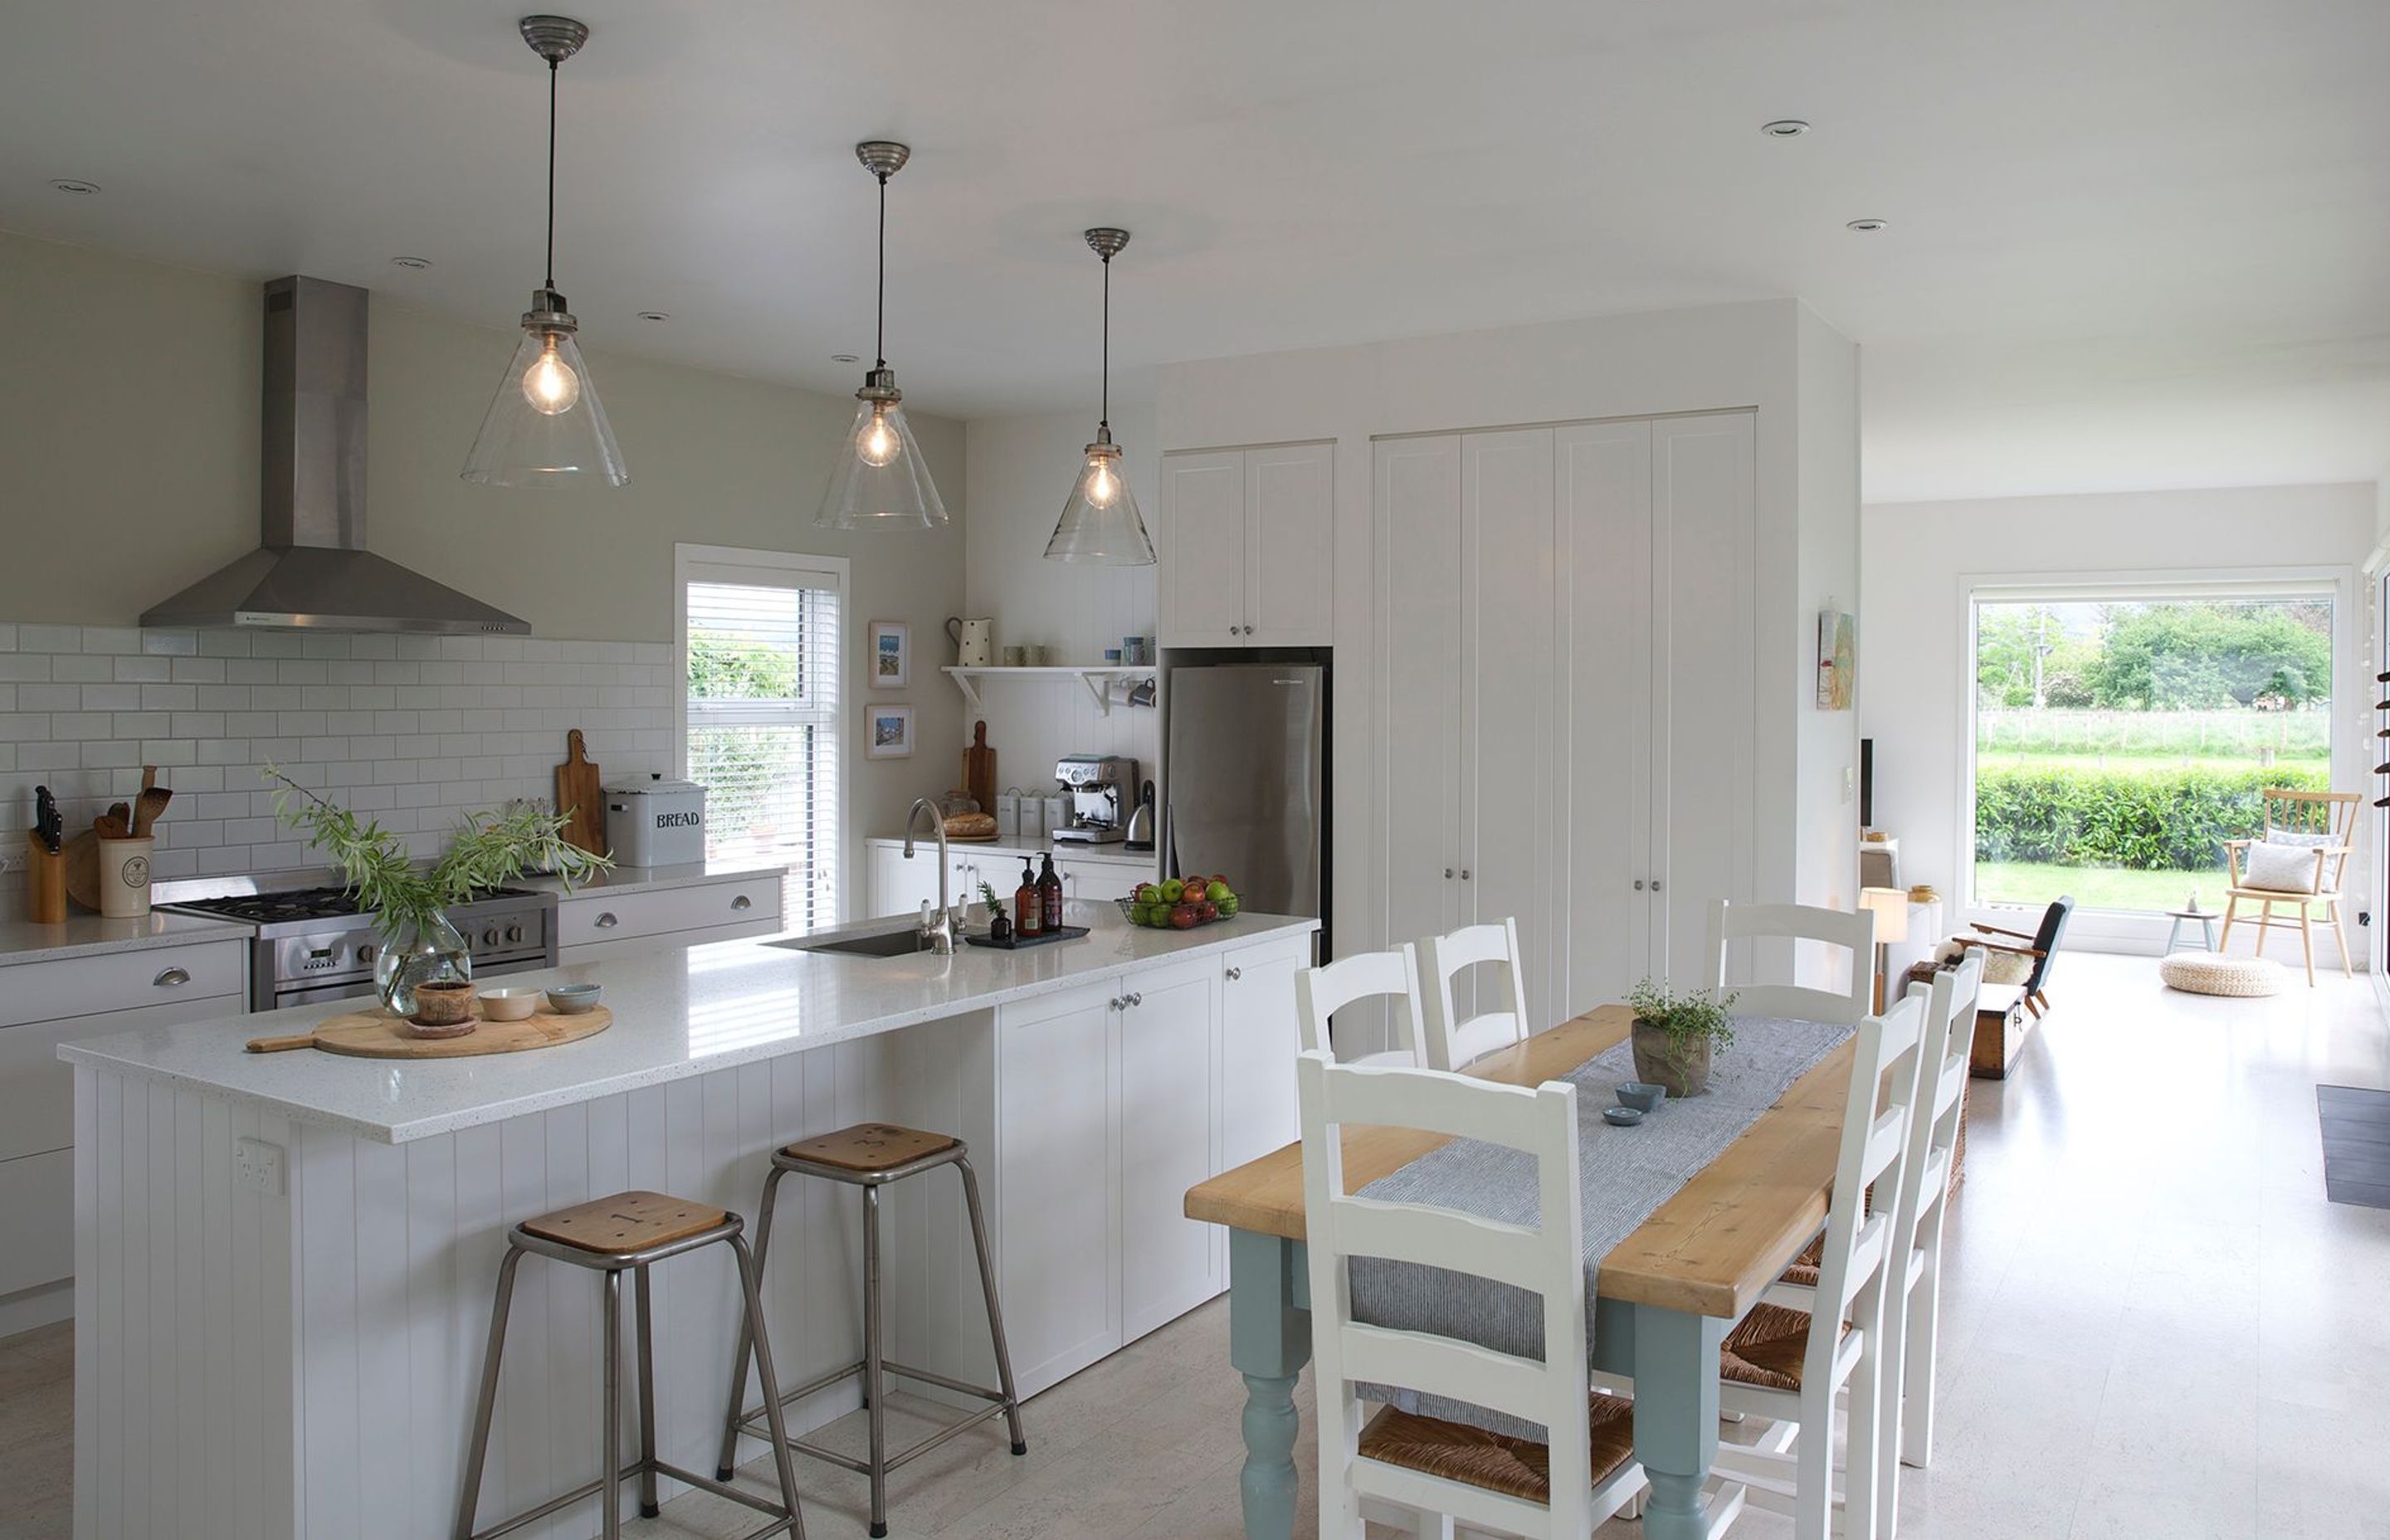 The relaxed kitchen and dining space flows through to the lounge and outdoor dining area. Light-coloured natural cork flooring provides a reflective surface to further lighten the interior.